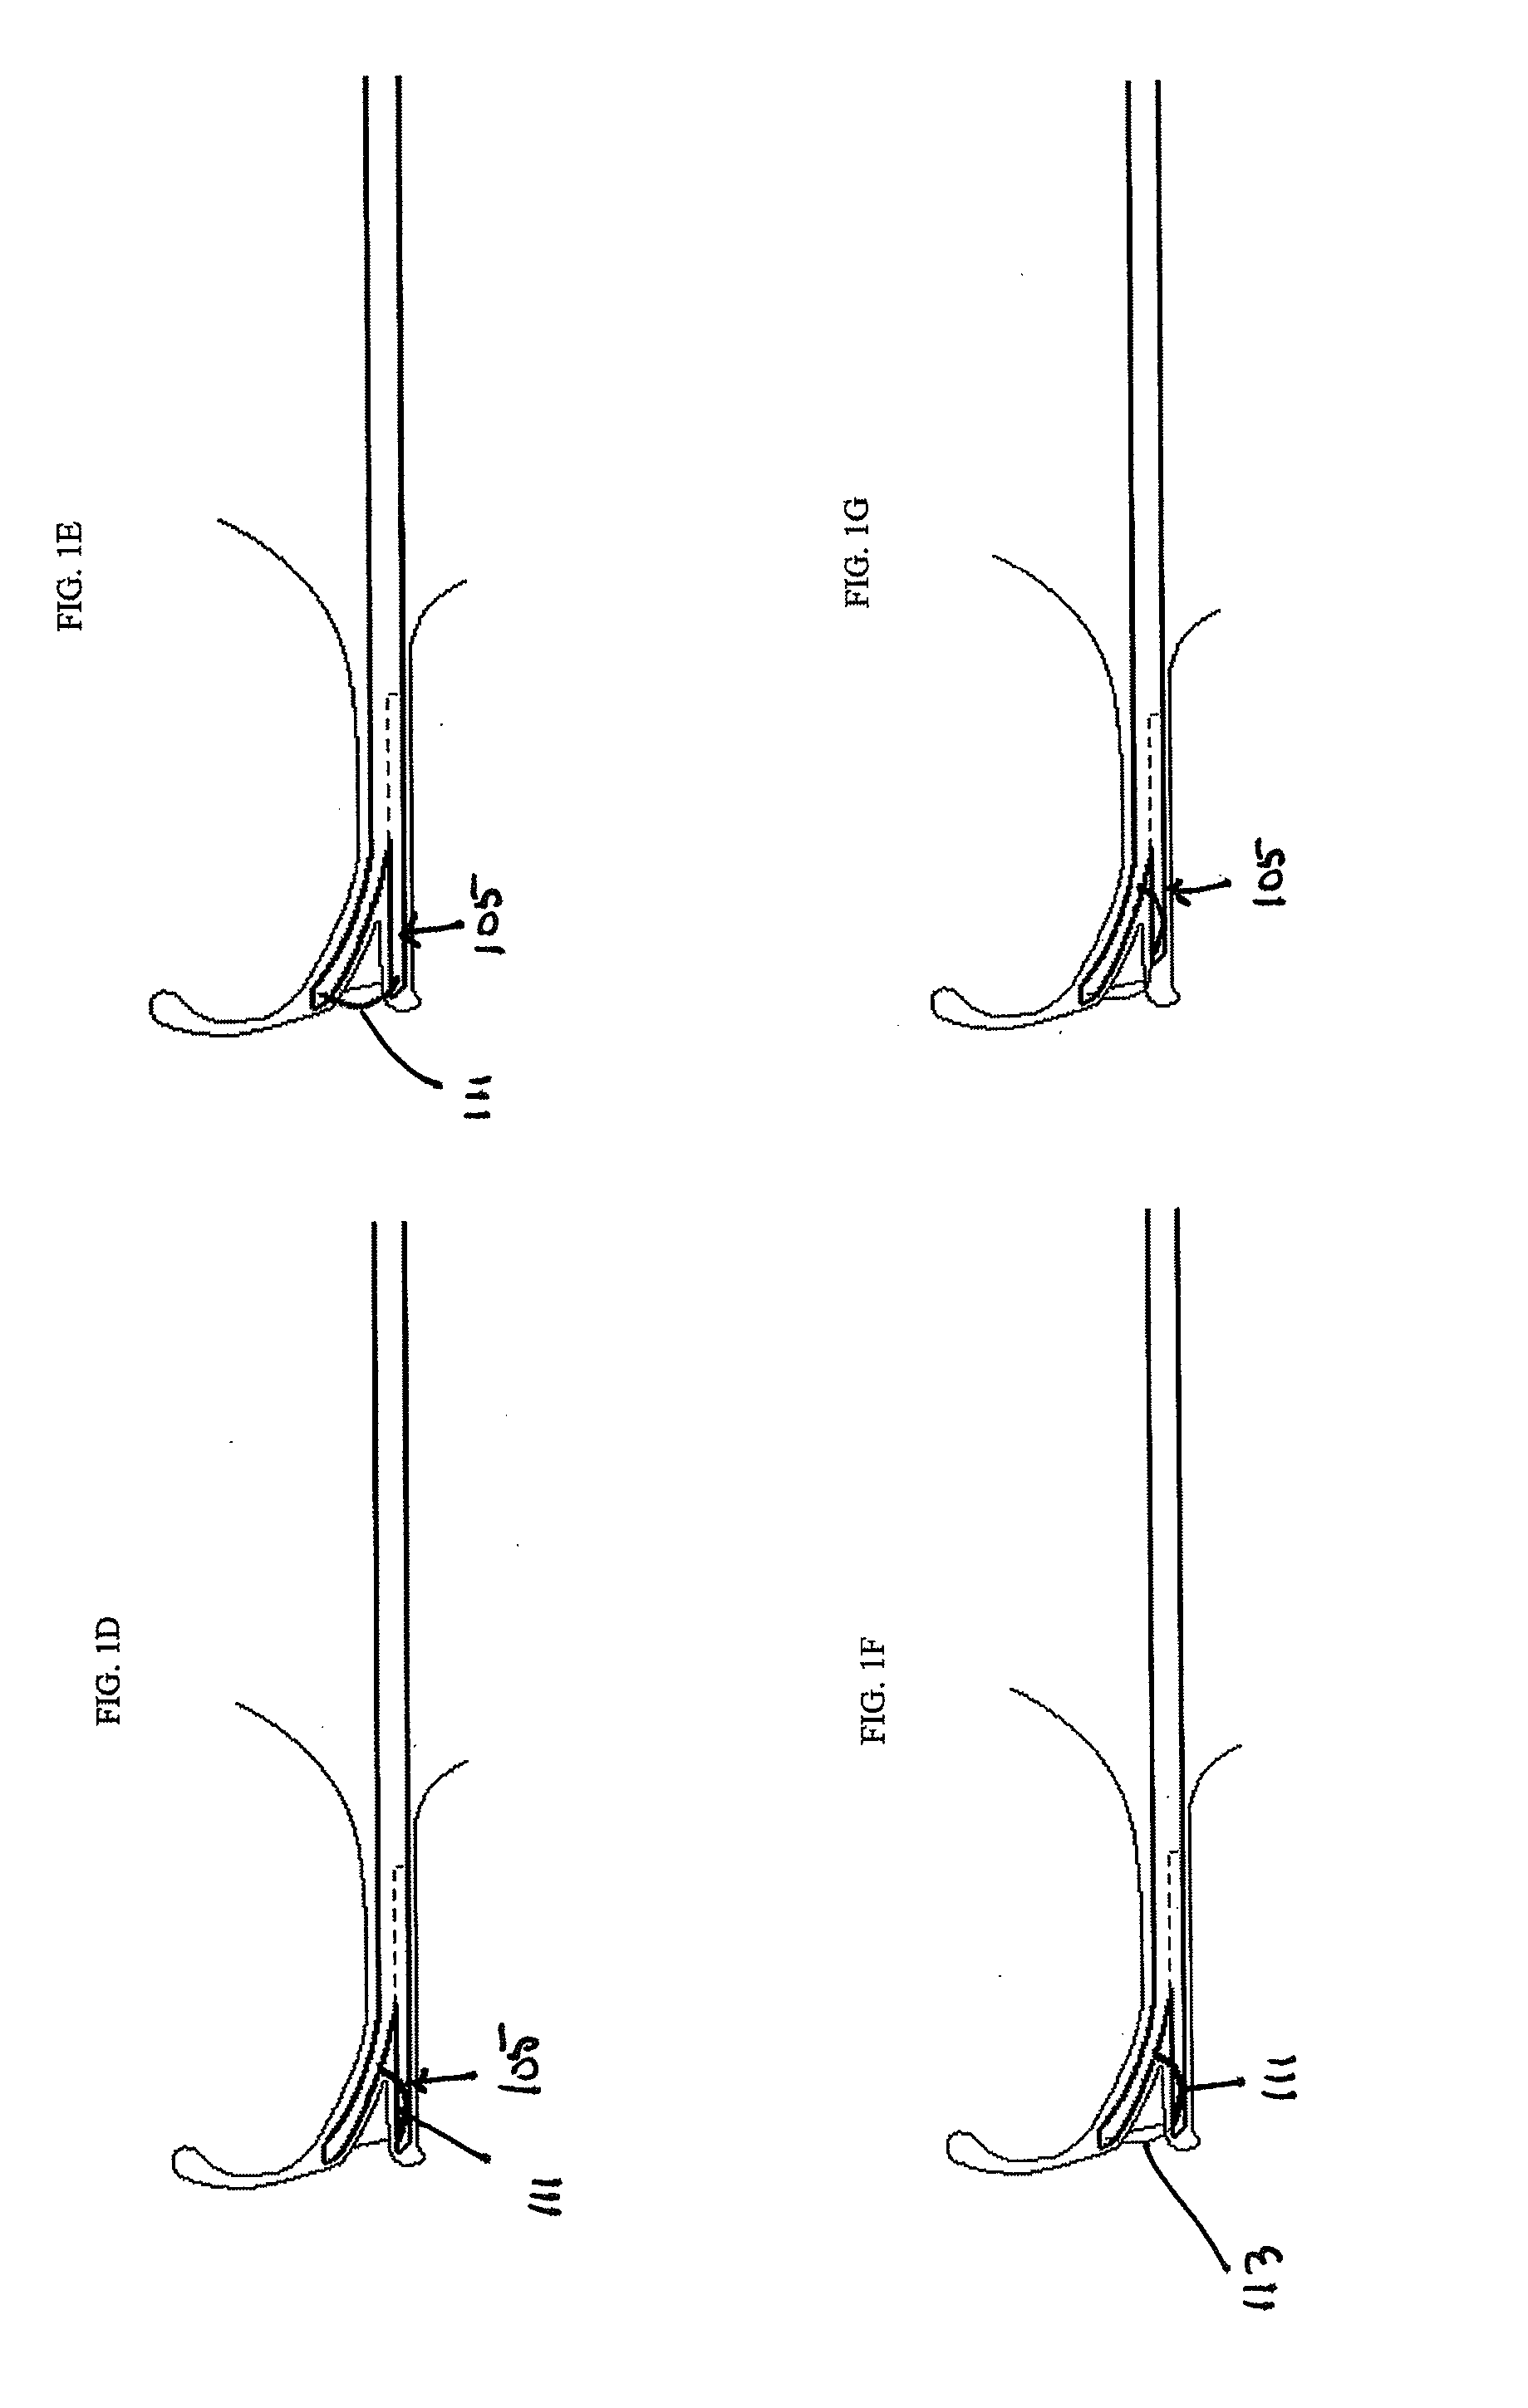 Devices, systems and methods for meniscus repair